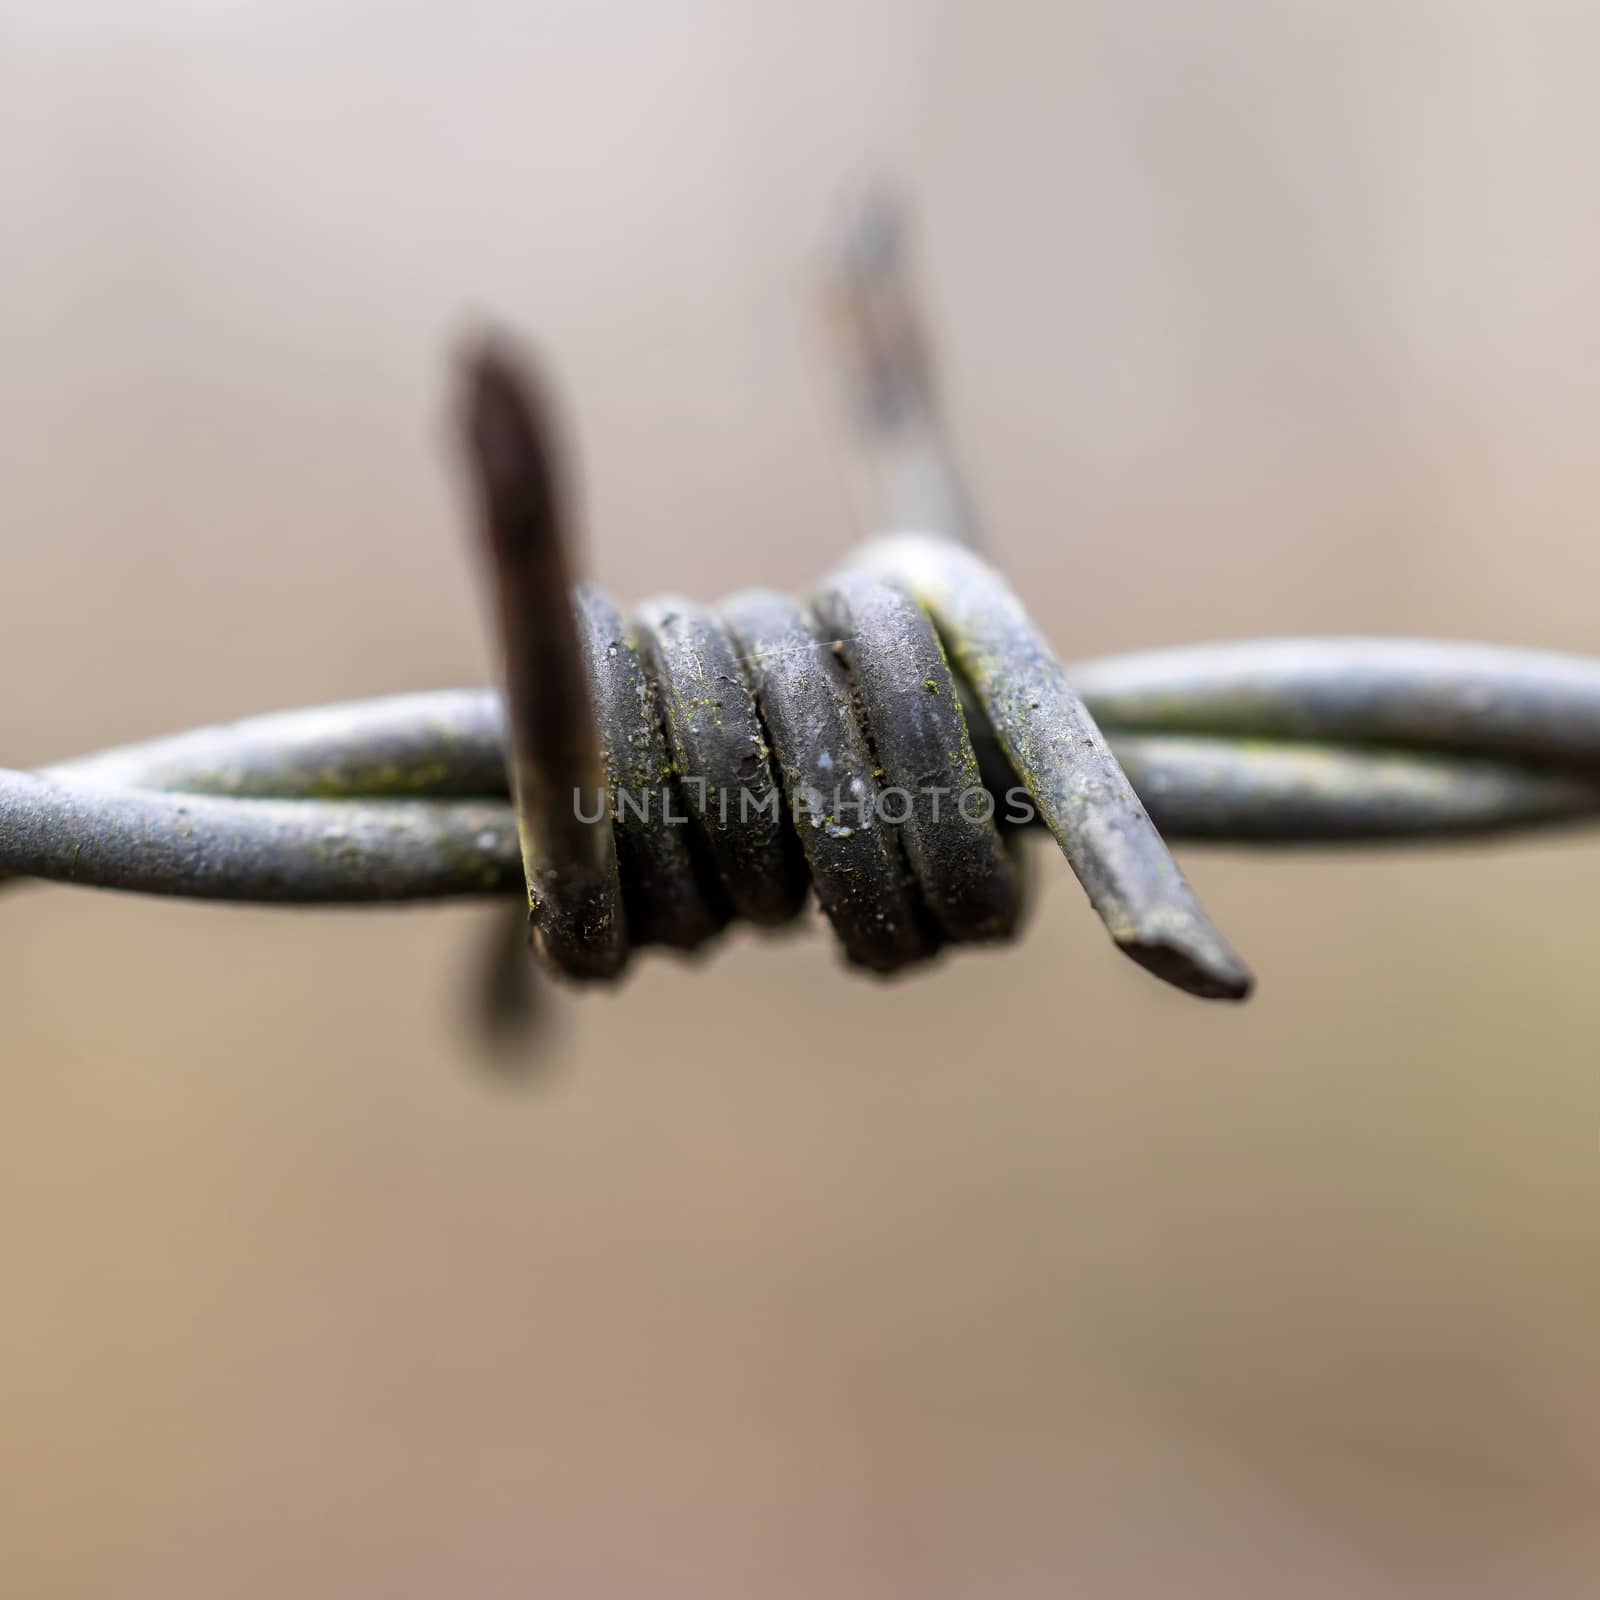 Close-up of an old barbed wire with remains of green paint and r by geogif